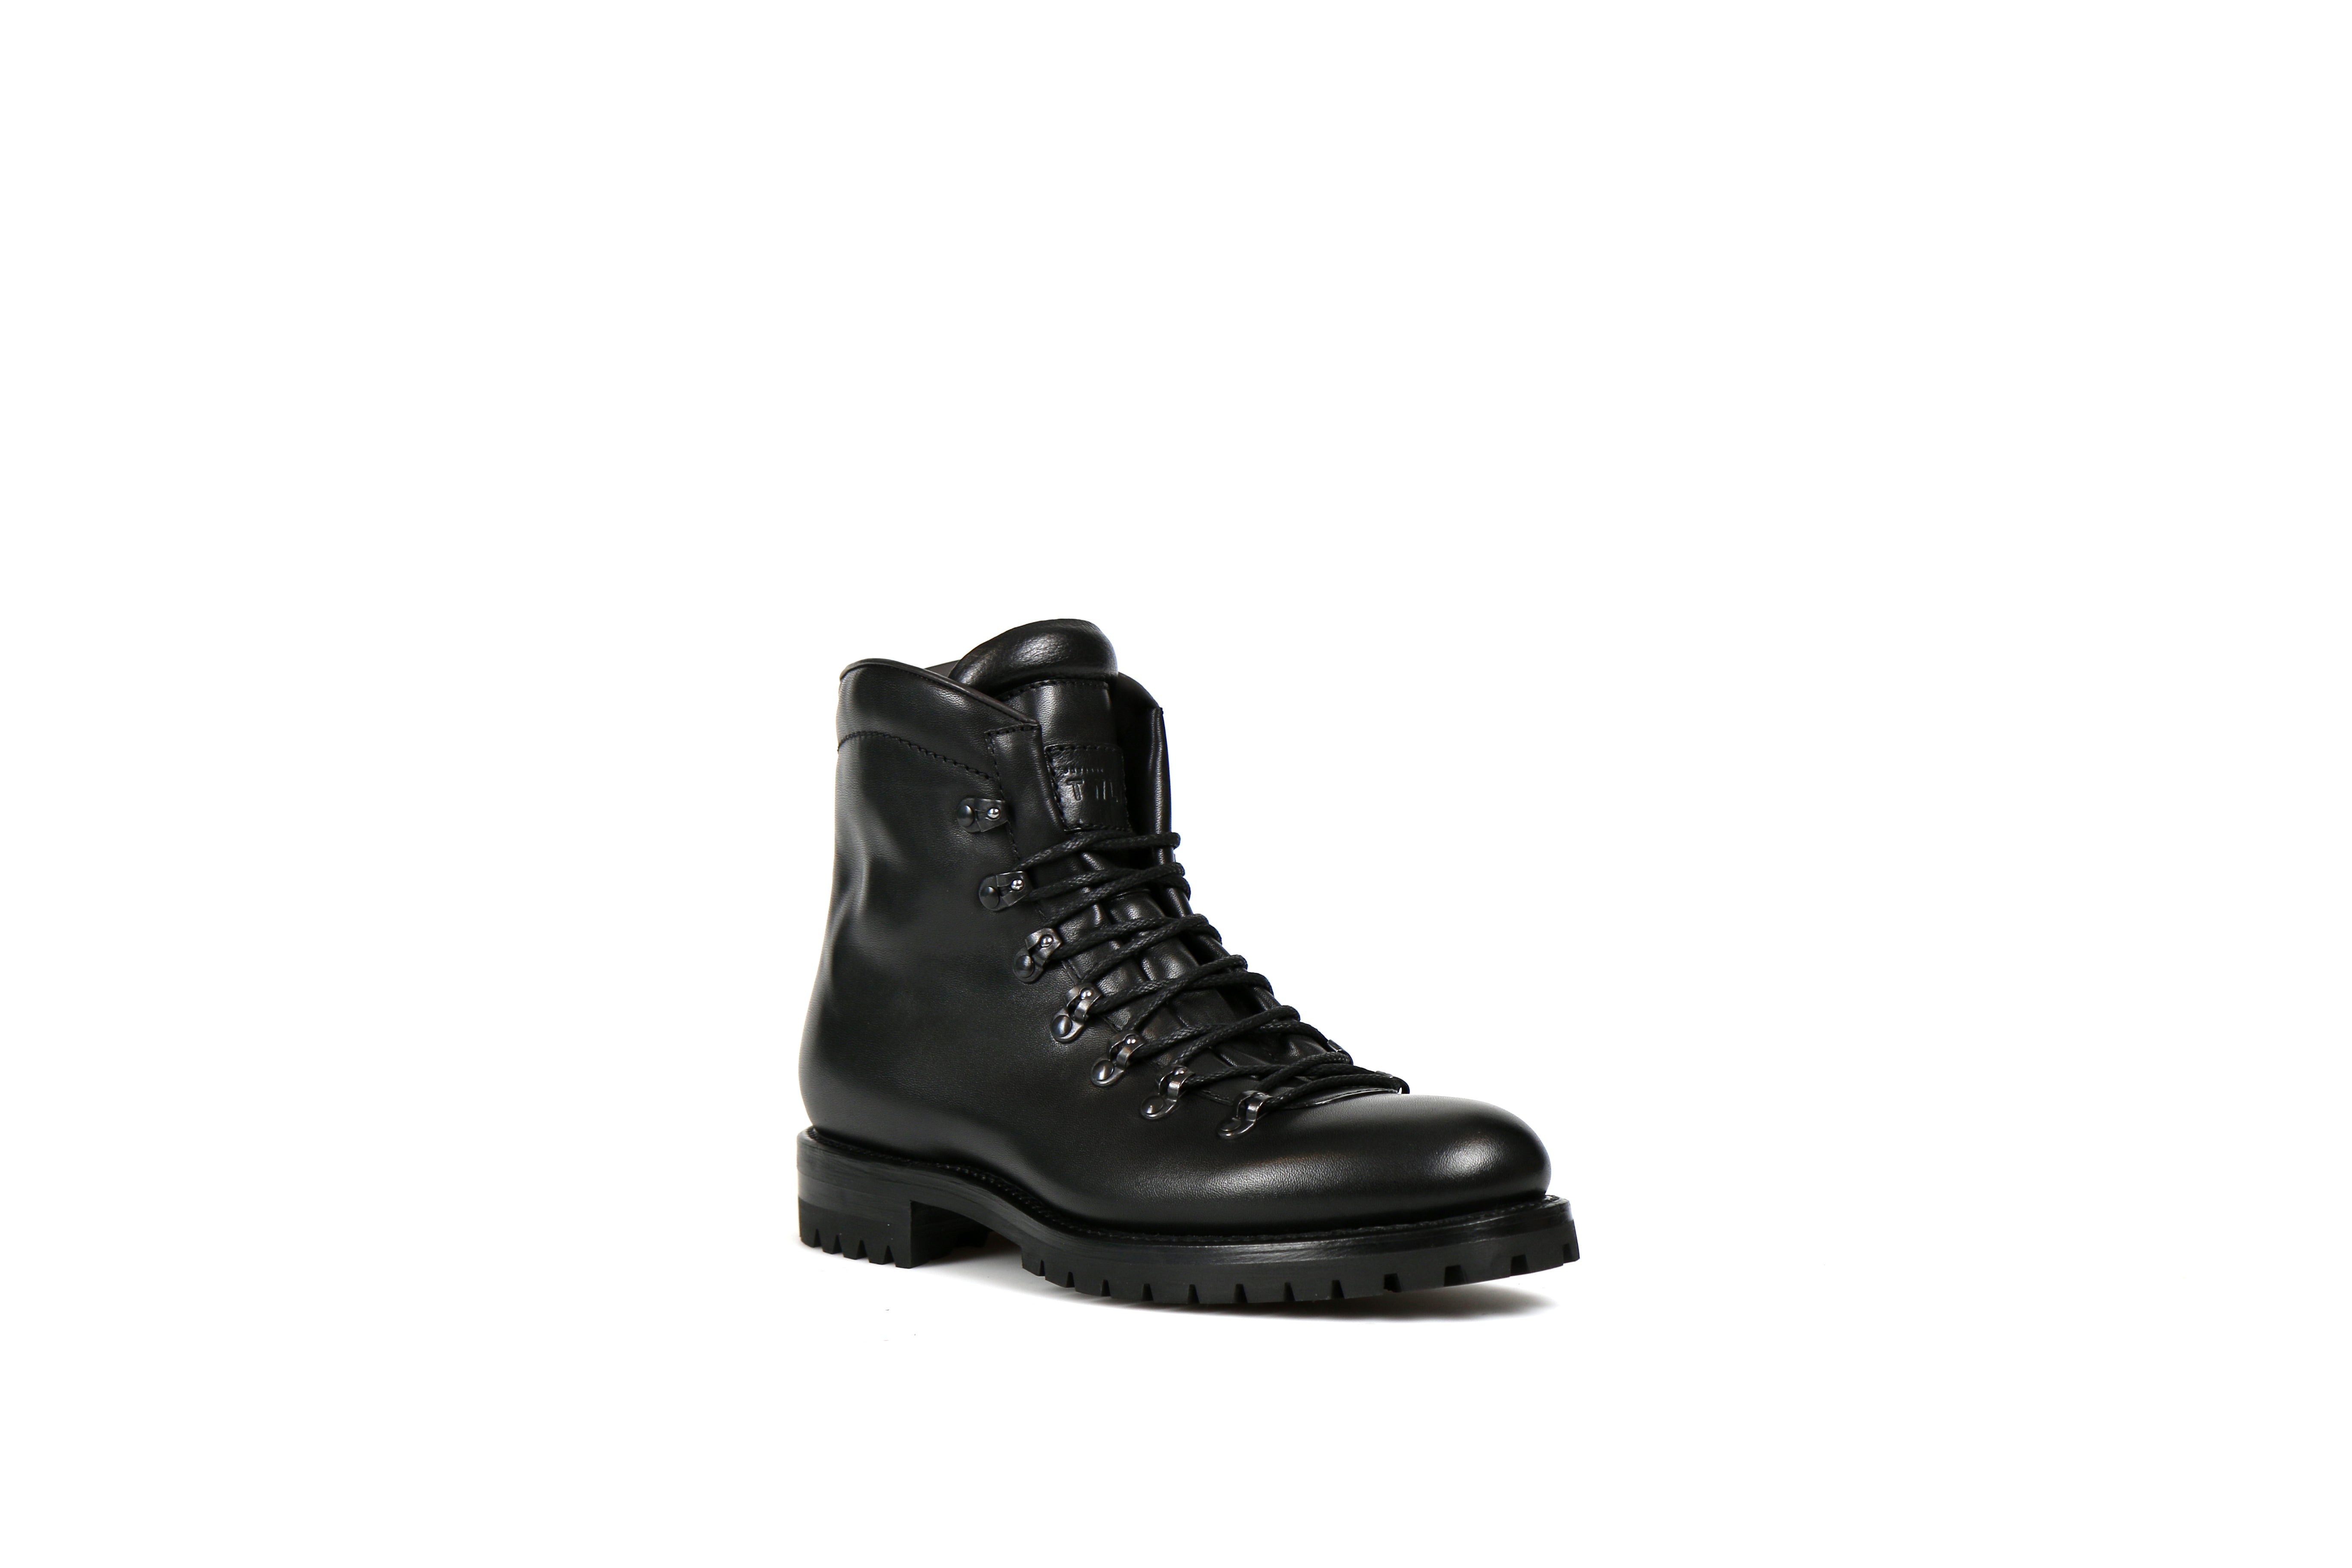 Kings Black Cordovan Leather Hiking Boots